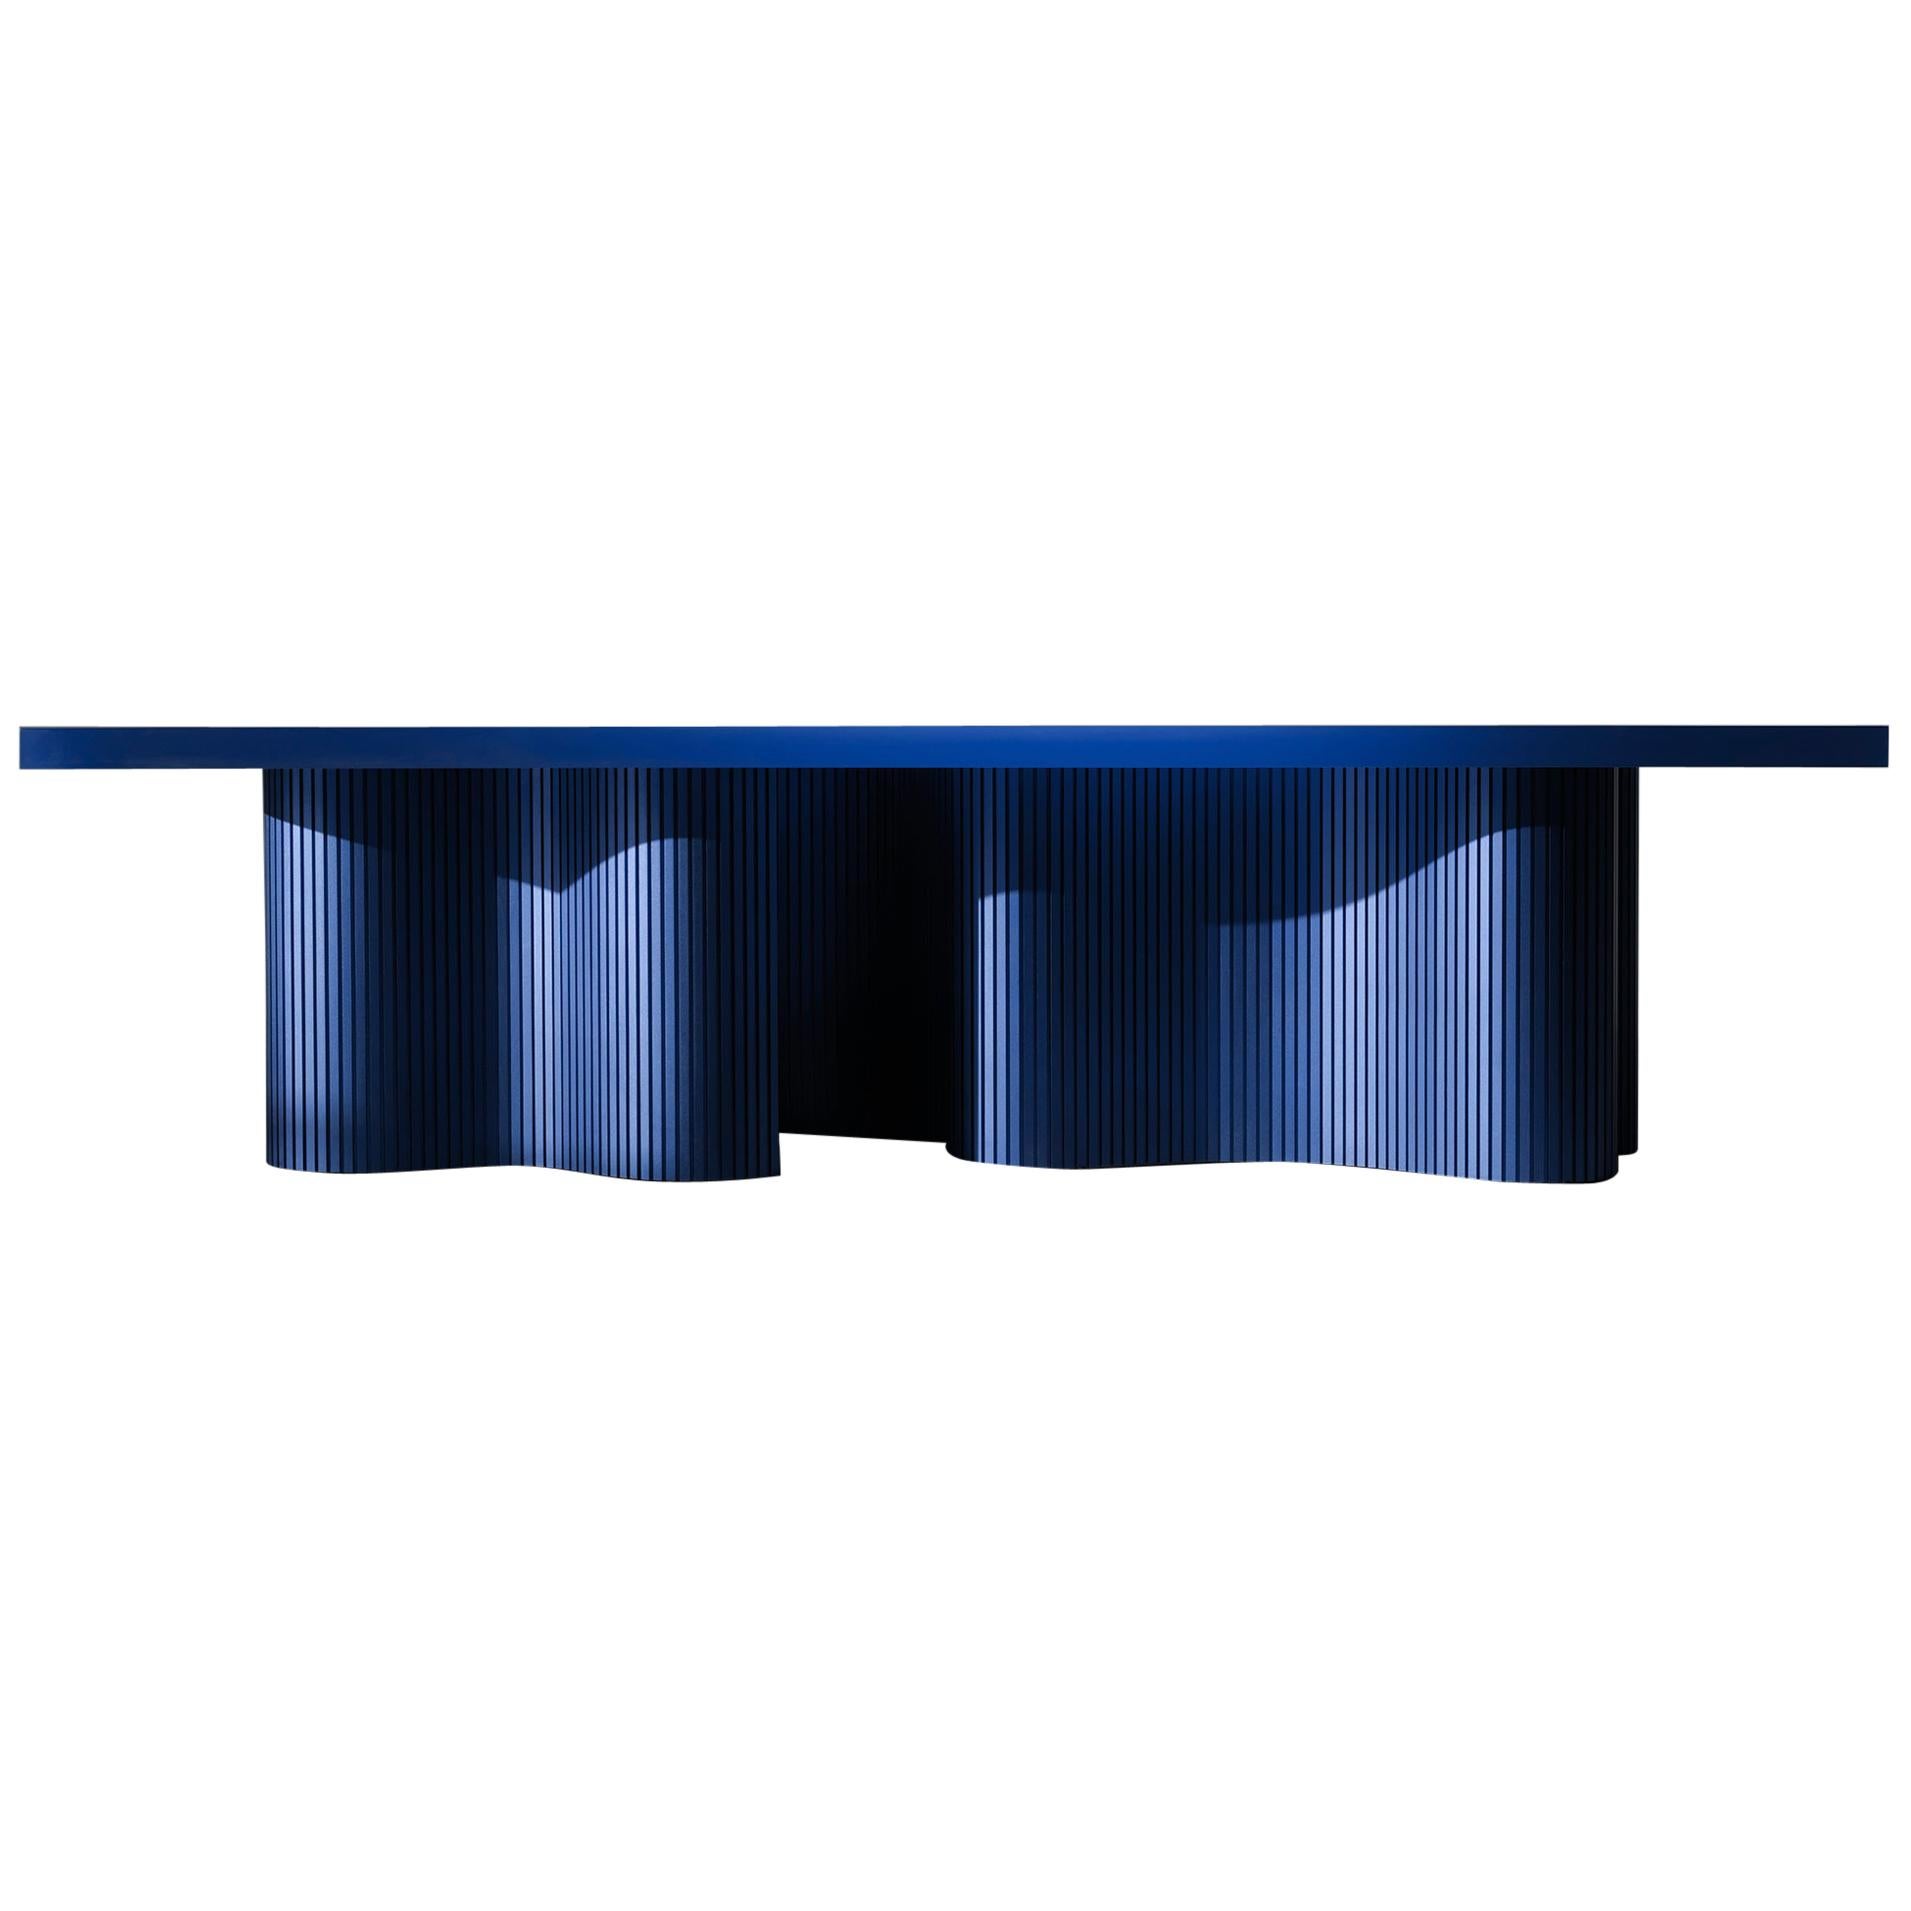 Contemporary Resin Coffee Table, Blue Polished Spine Table, by Erik Olovsson